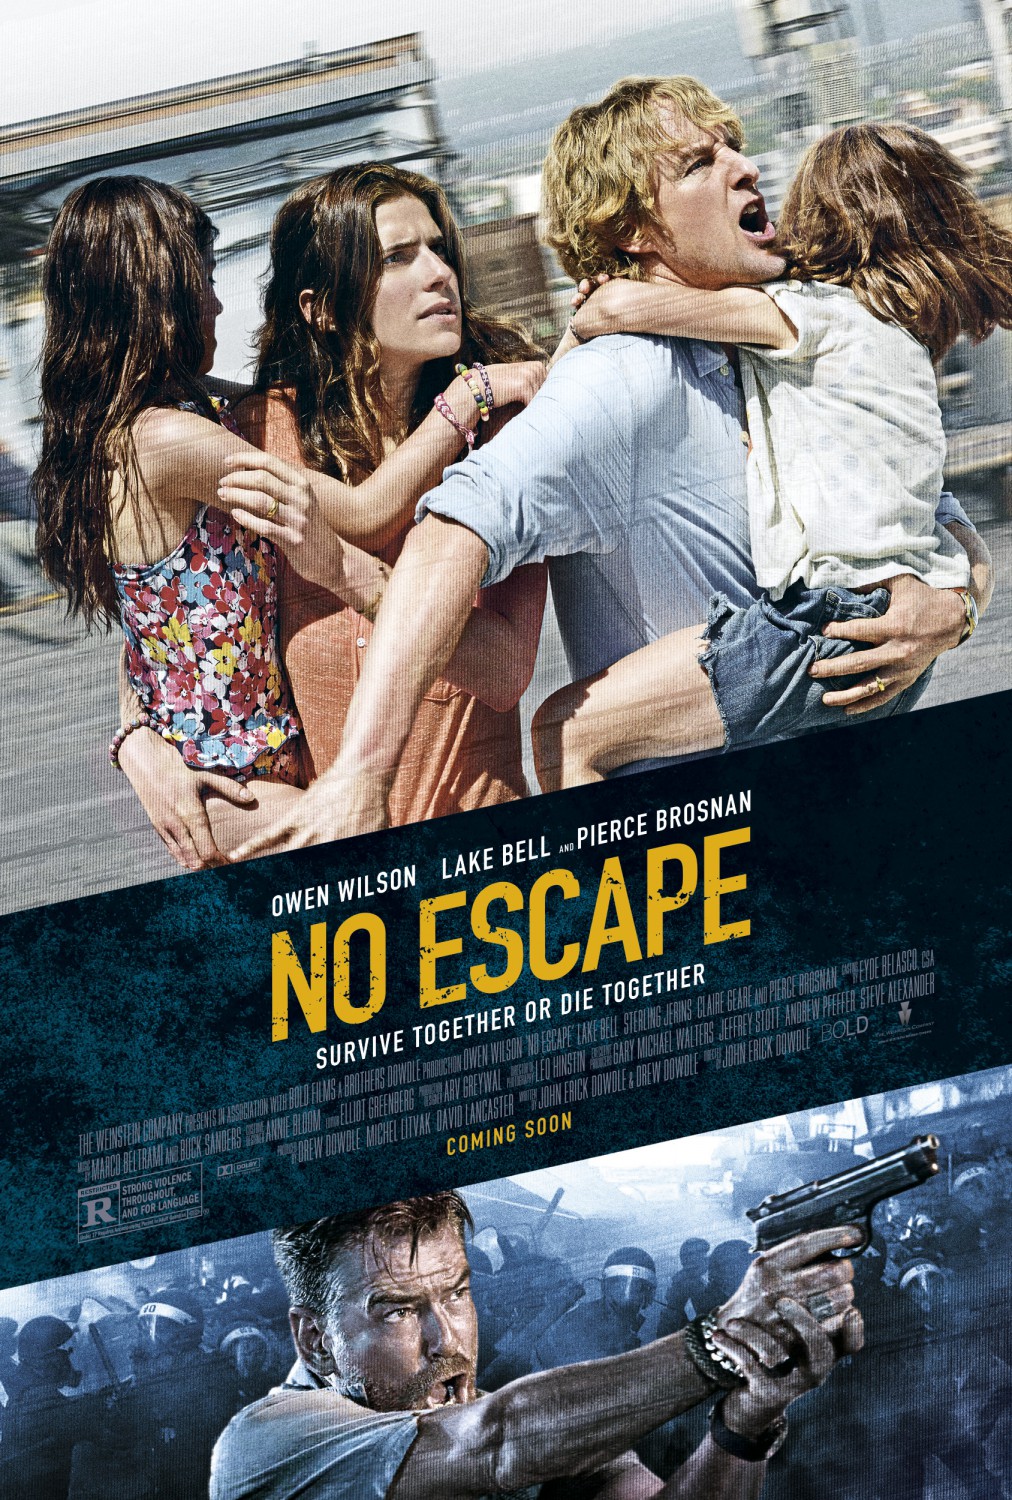 New No Escape Trailer Tv Spots And Posters The Entertainment Factor